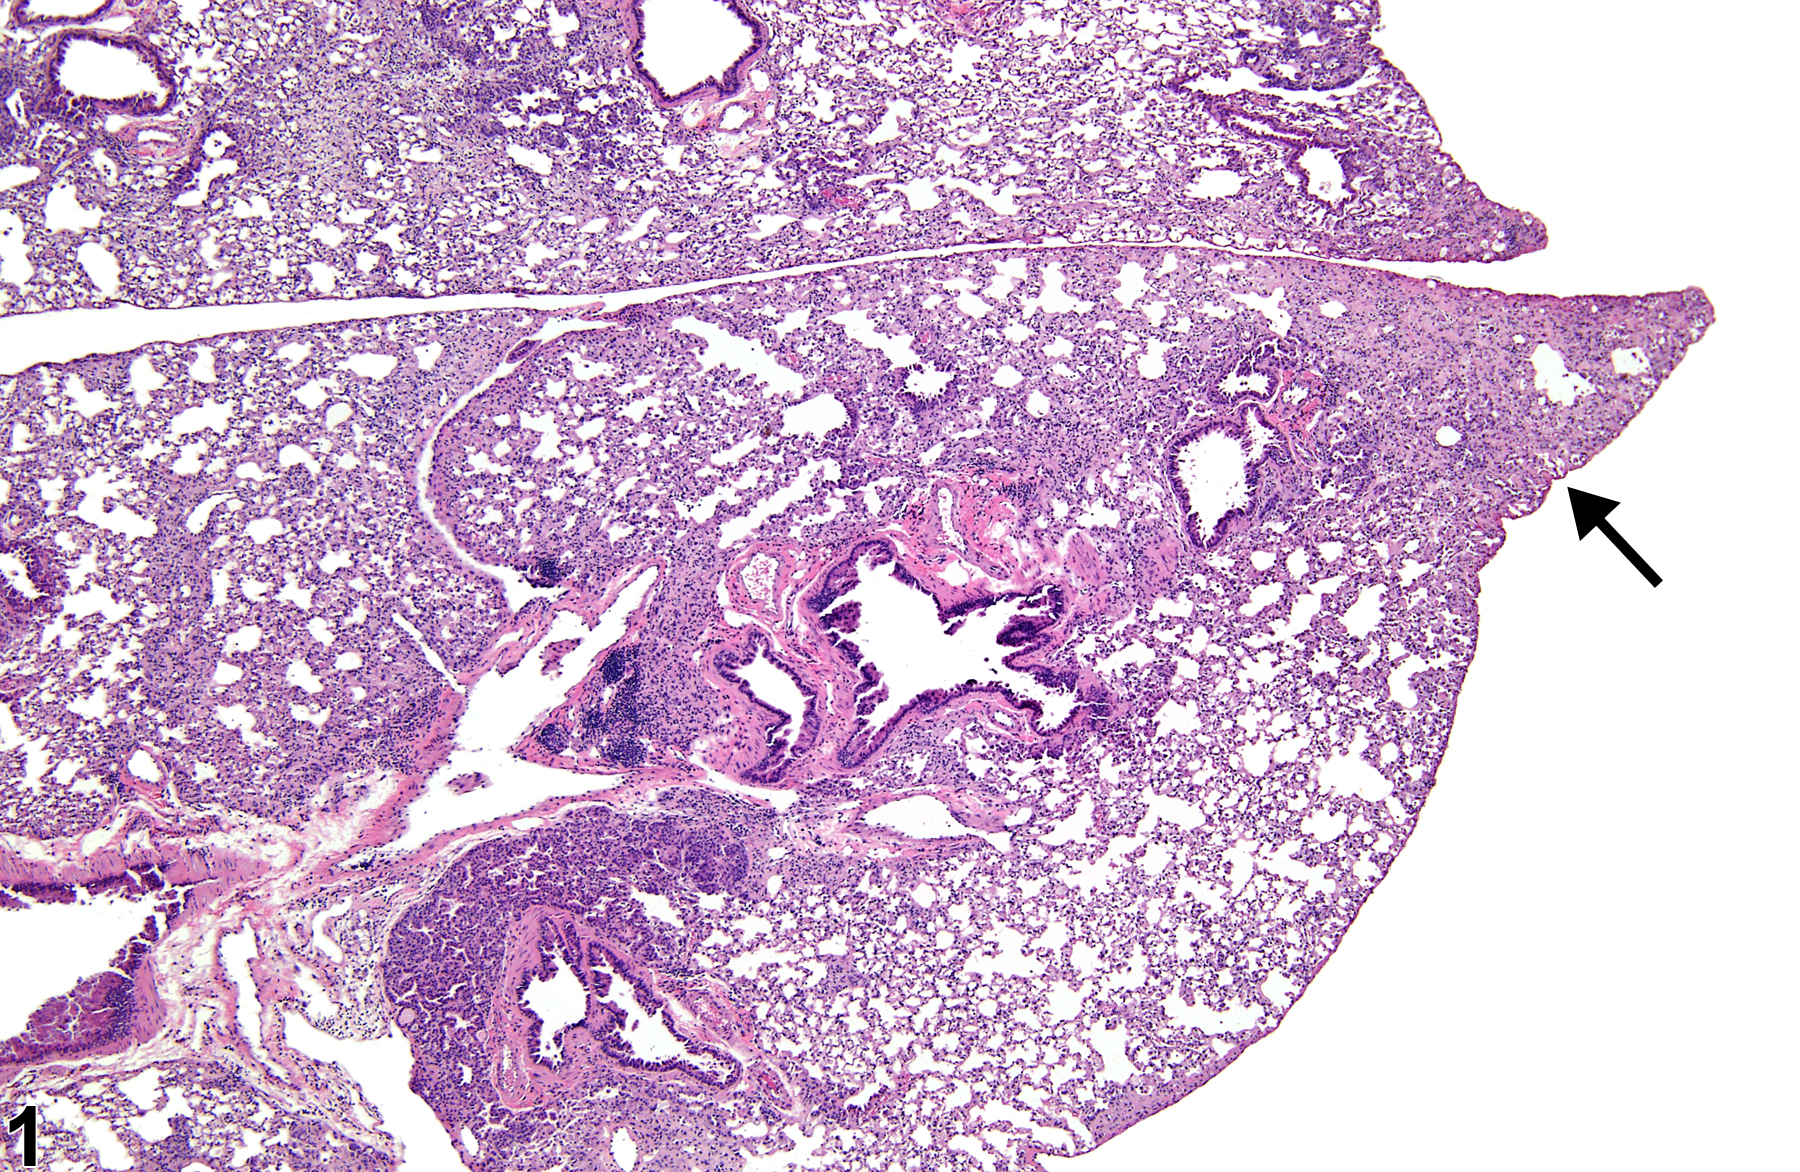 Image of fibrosis in the lung from a mouse